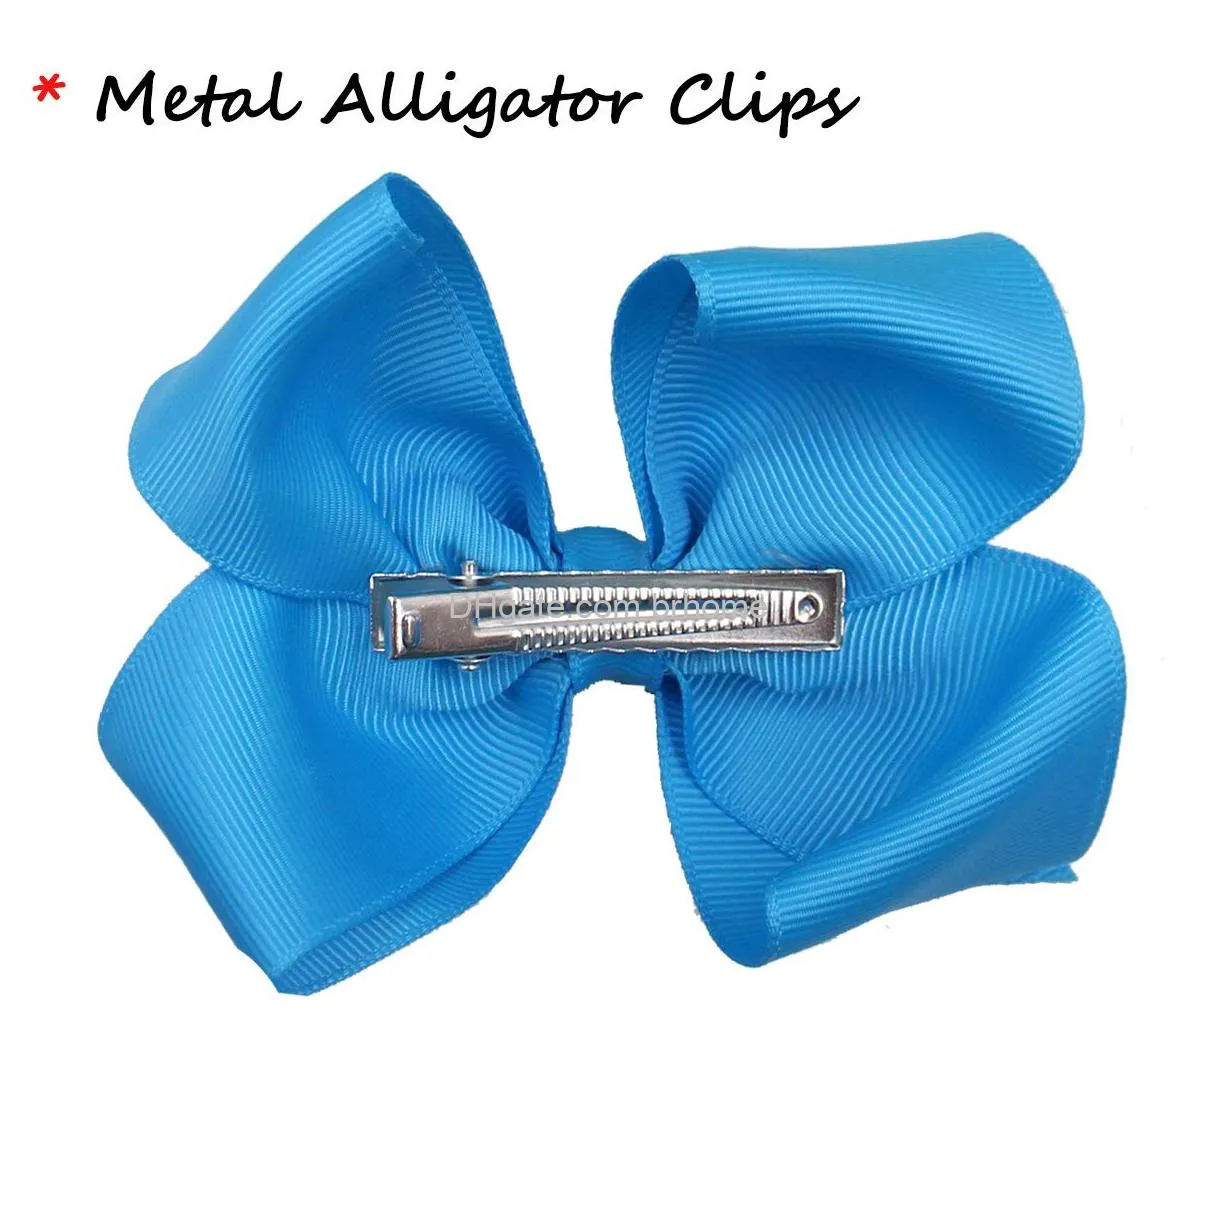 4.5 hair bows alligator clips grosgrain ribbon big bows clips for girls toddlers kids children in pairs